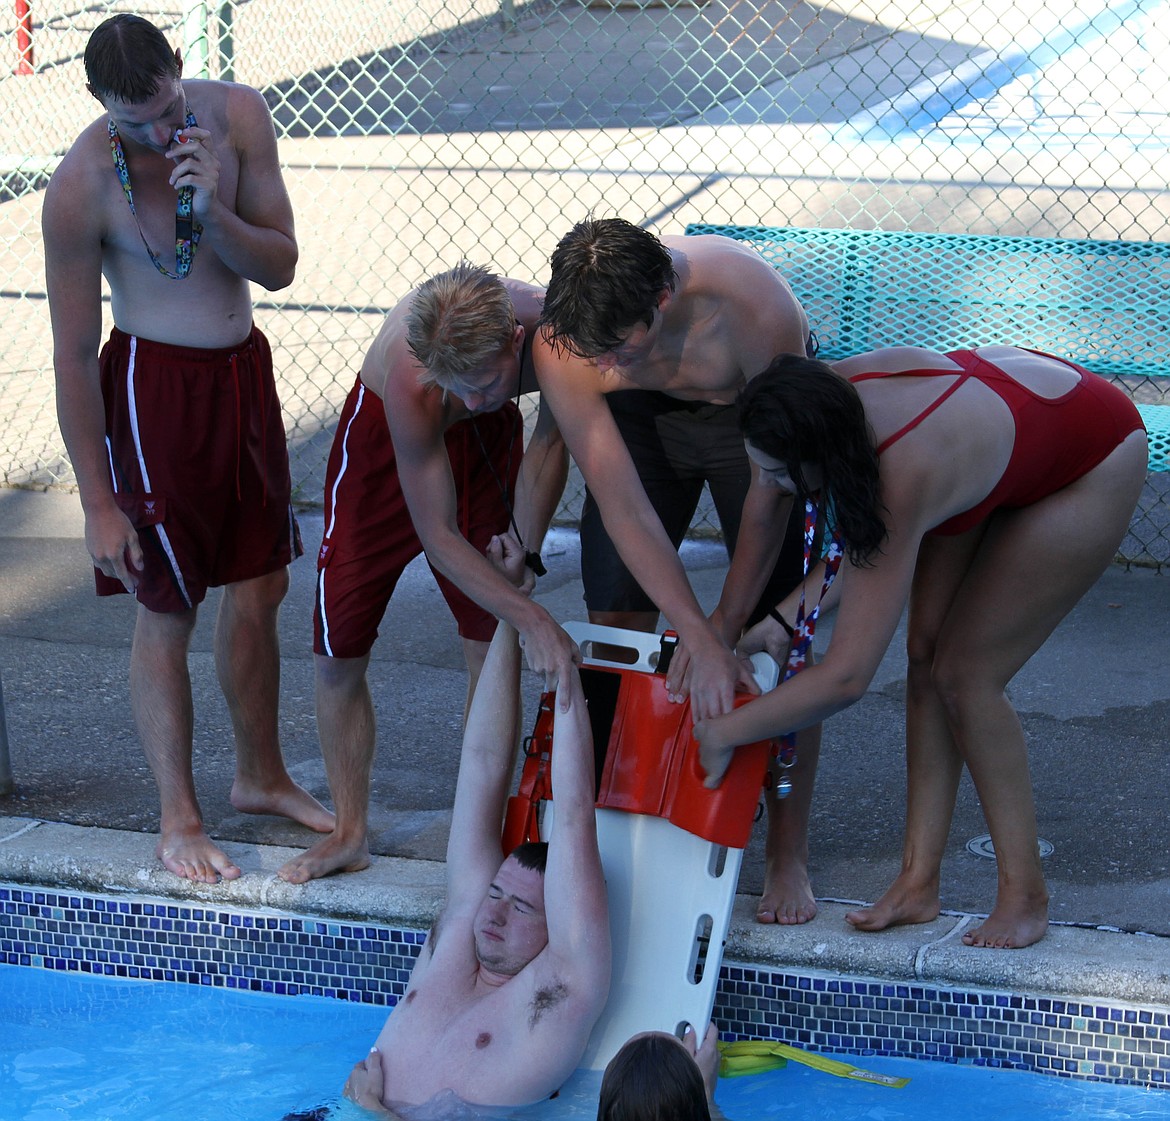 Lifeguards at the Kellogg Pool work to get a drowning victim on their new backboard during an inservice simulation earlier this week.